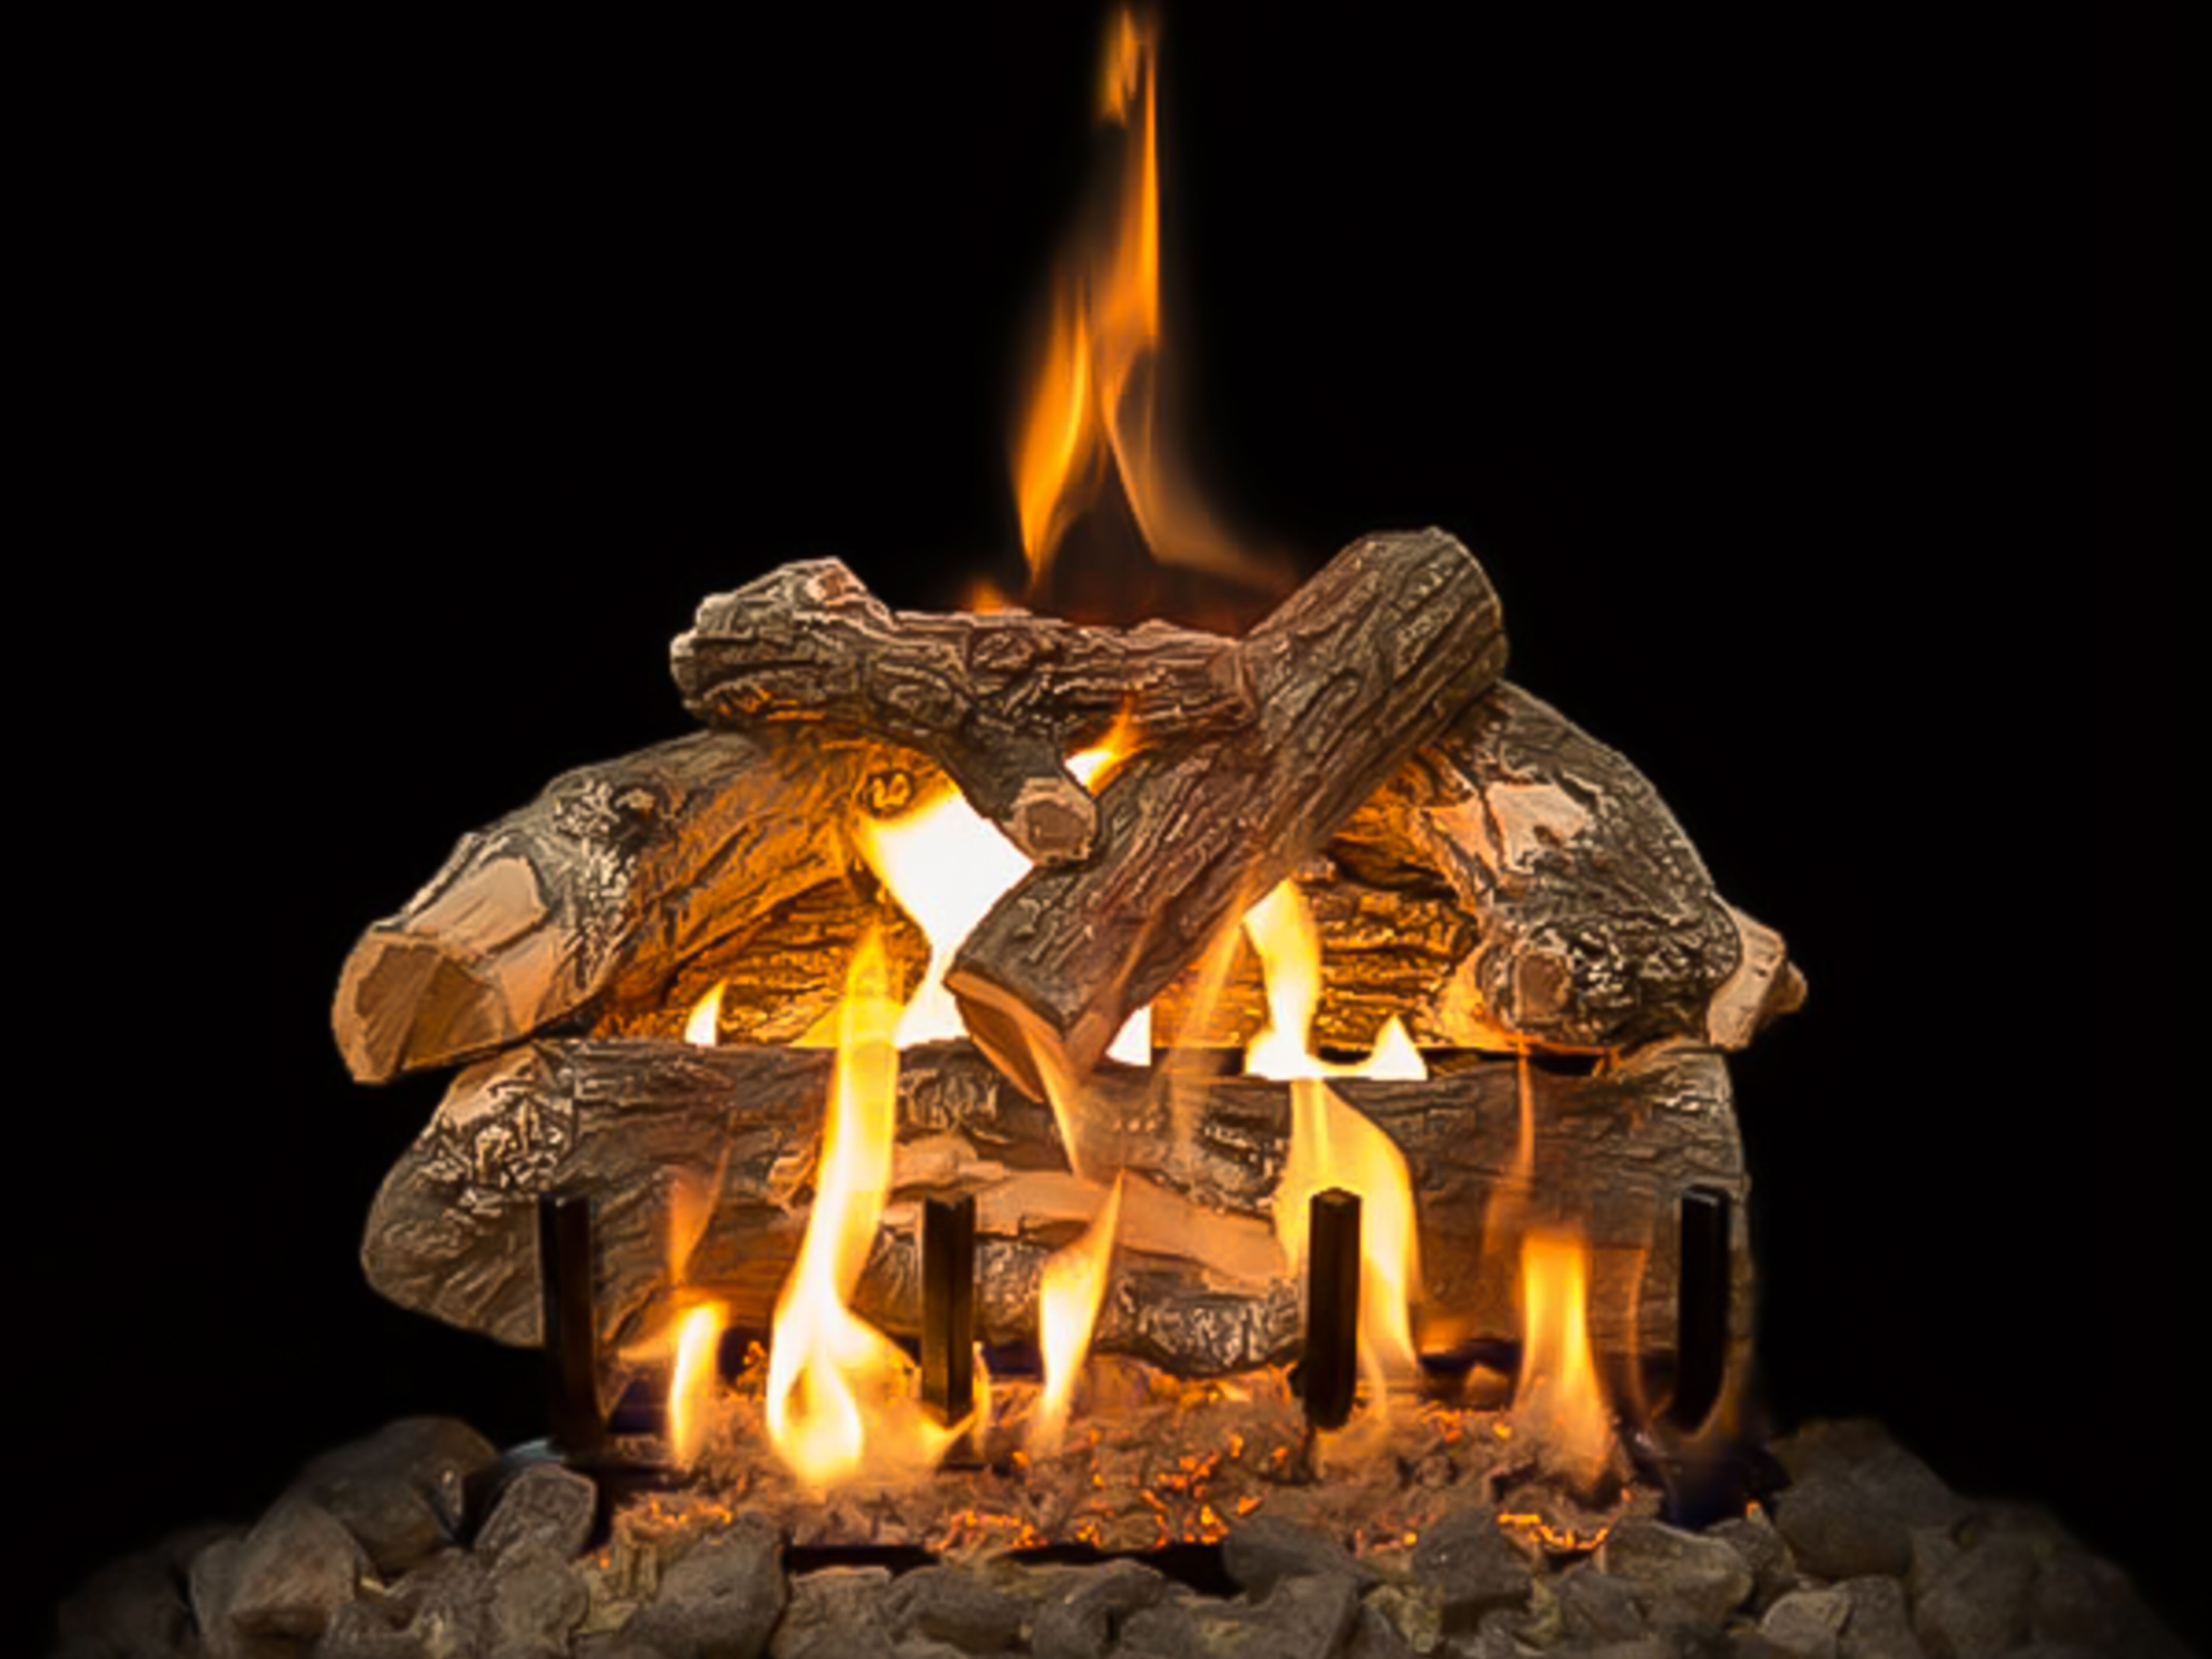 The Weathered Oak gas log set from Grand Canyon Gas Logs is cast from real wood found in the Arizona wilderness and features a hand-painted, textured bark finish and authentic splitting. 